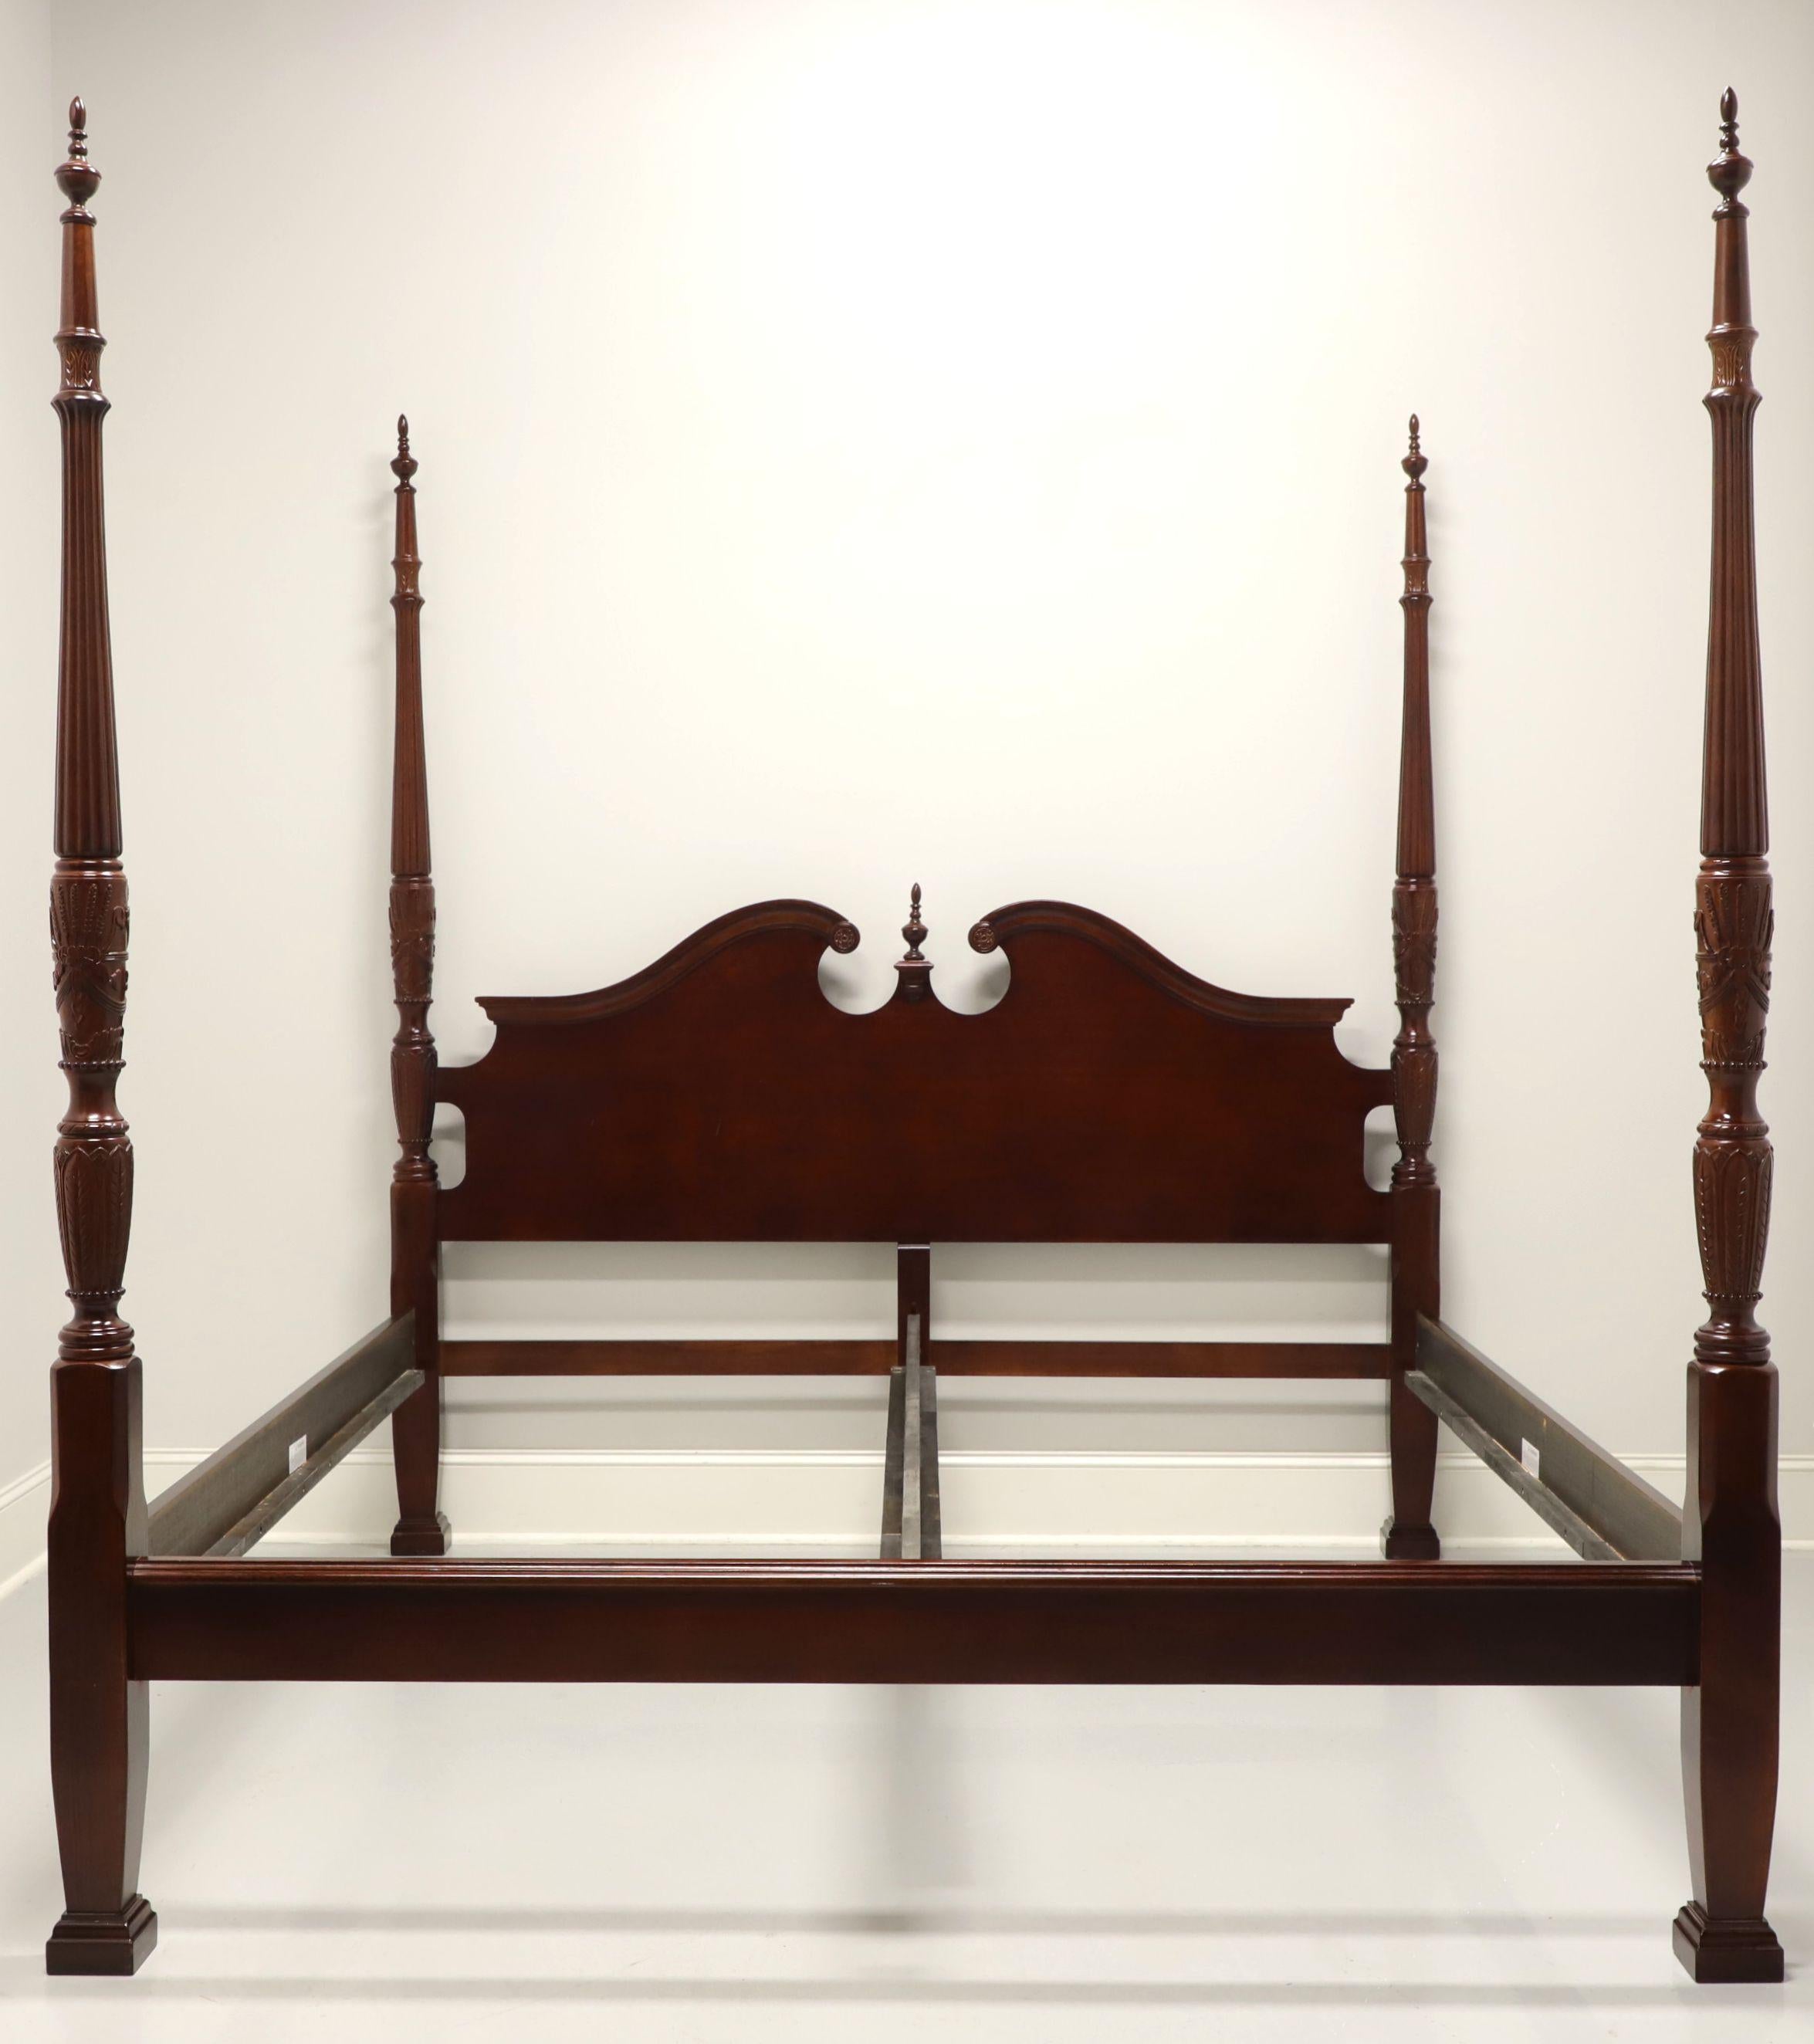 A Traditional style king size poster bed by Universal Furniture. Cherry wood with four rice carved posts with finials, brass hardware accents, clip held side & center rails with screw affixed wood strips providing mattress support. Headboard